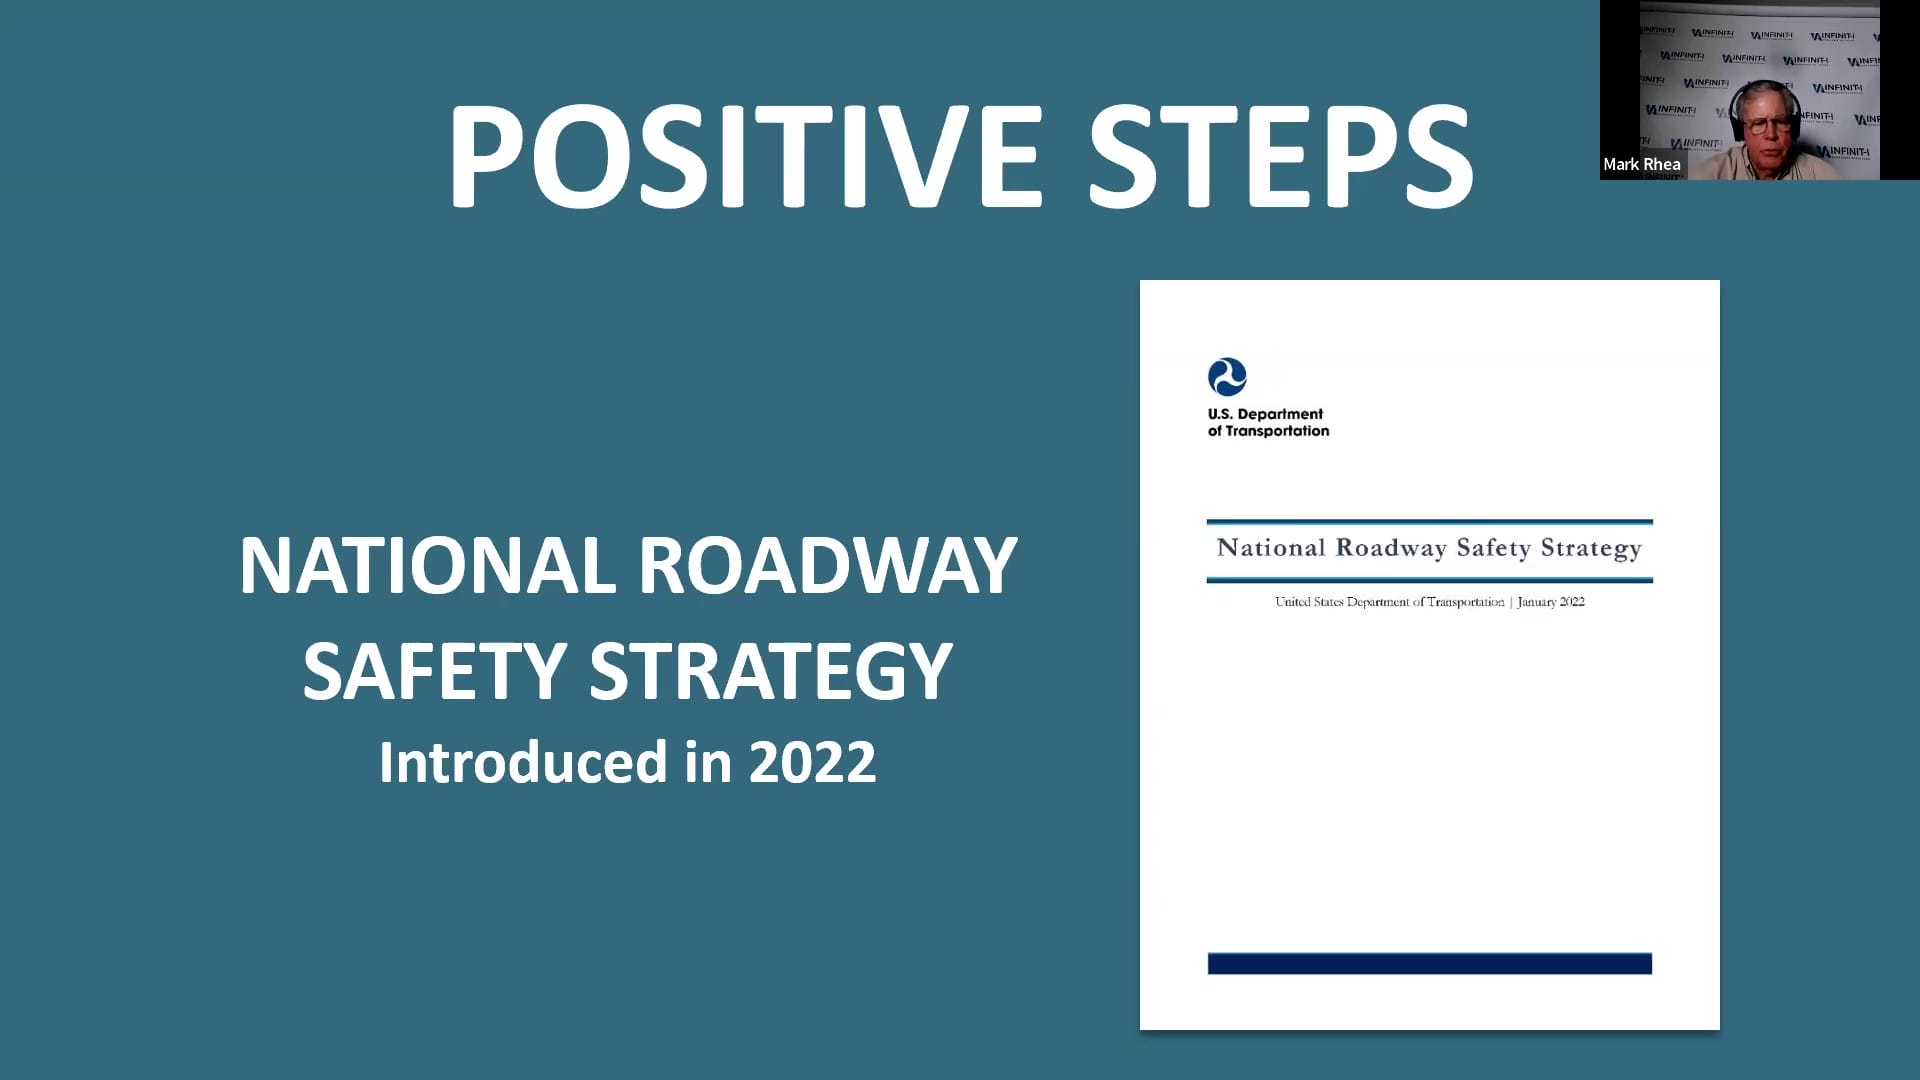 National Roadway Safety Strategy 2022